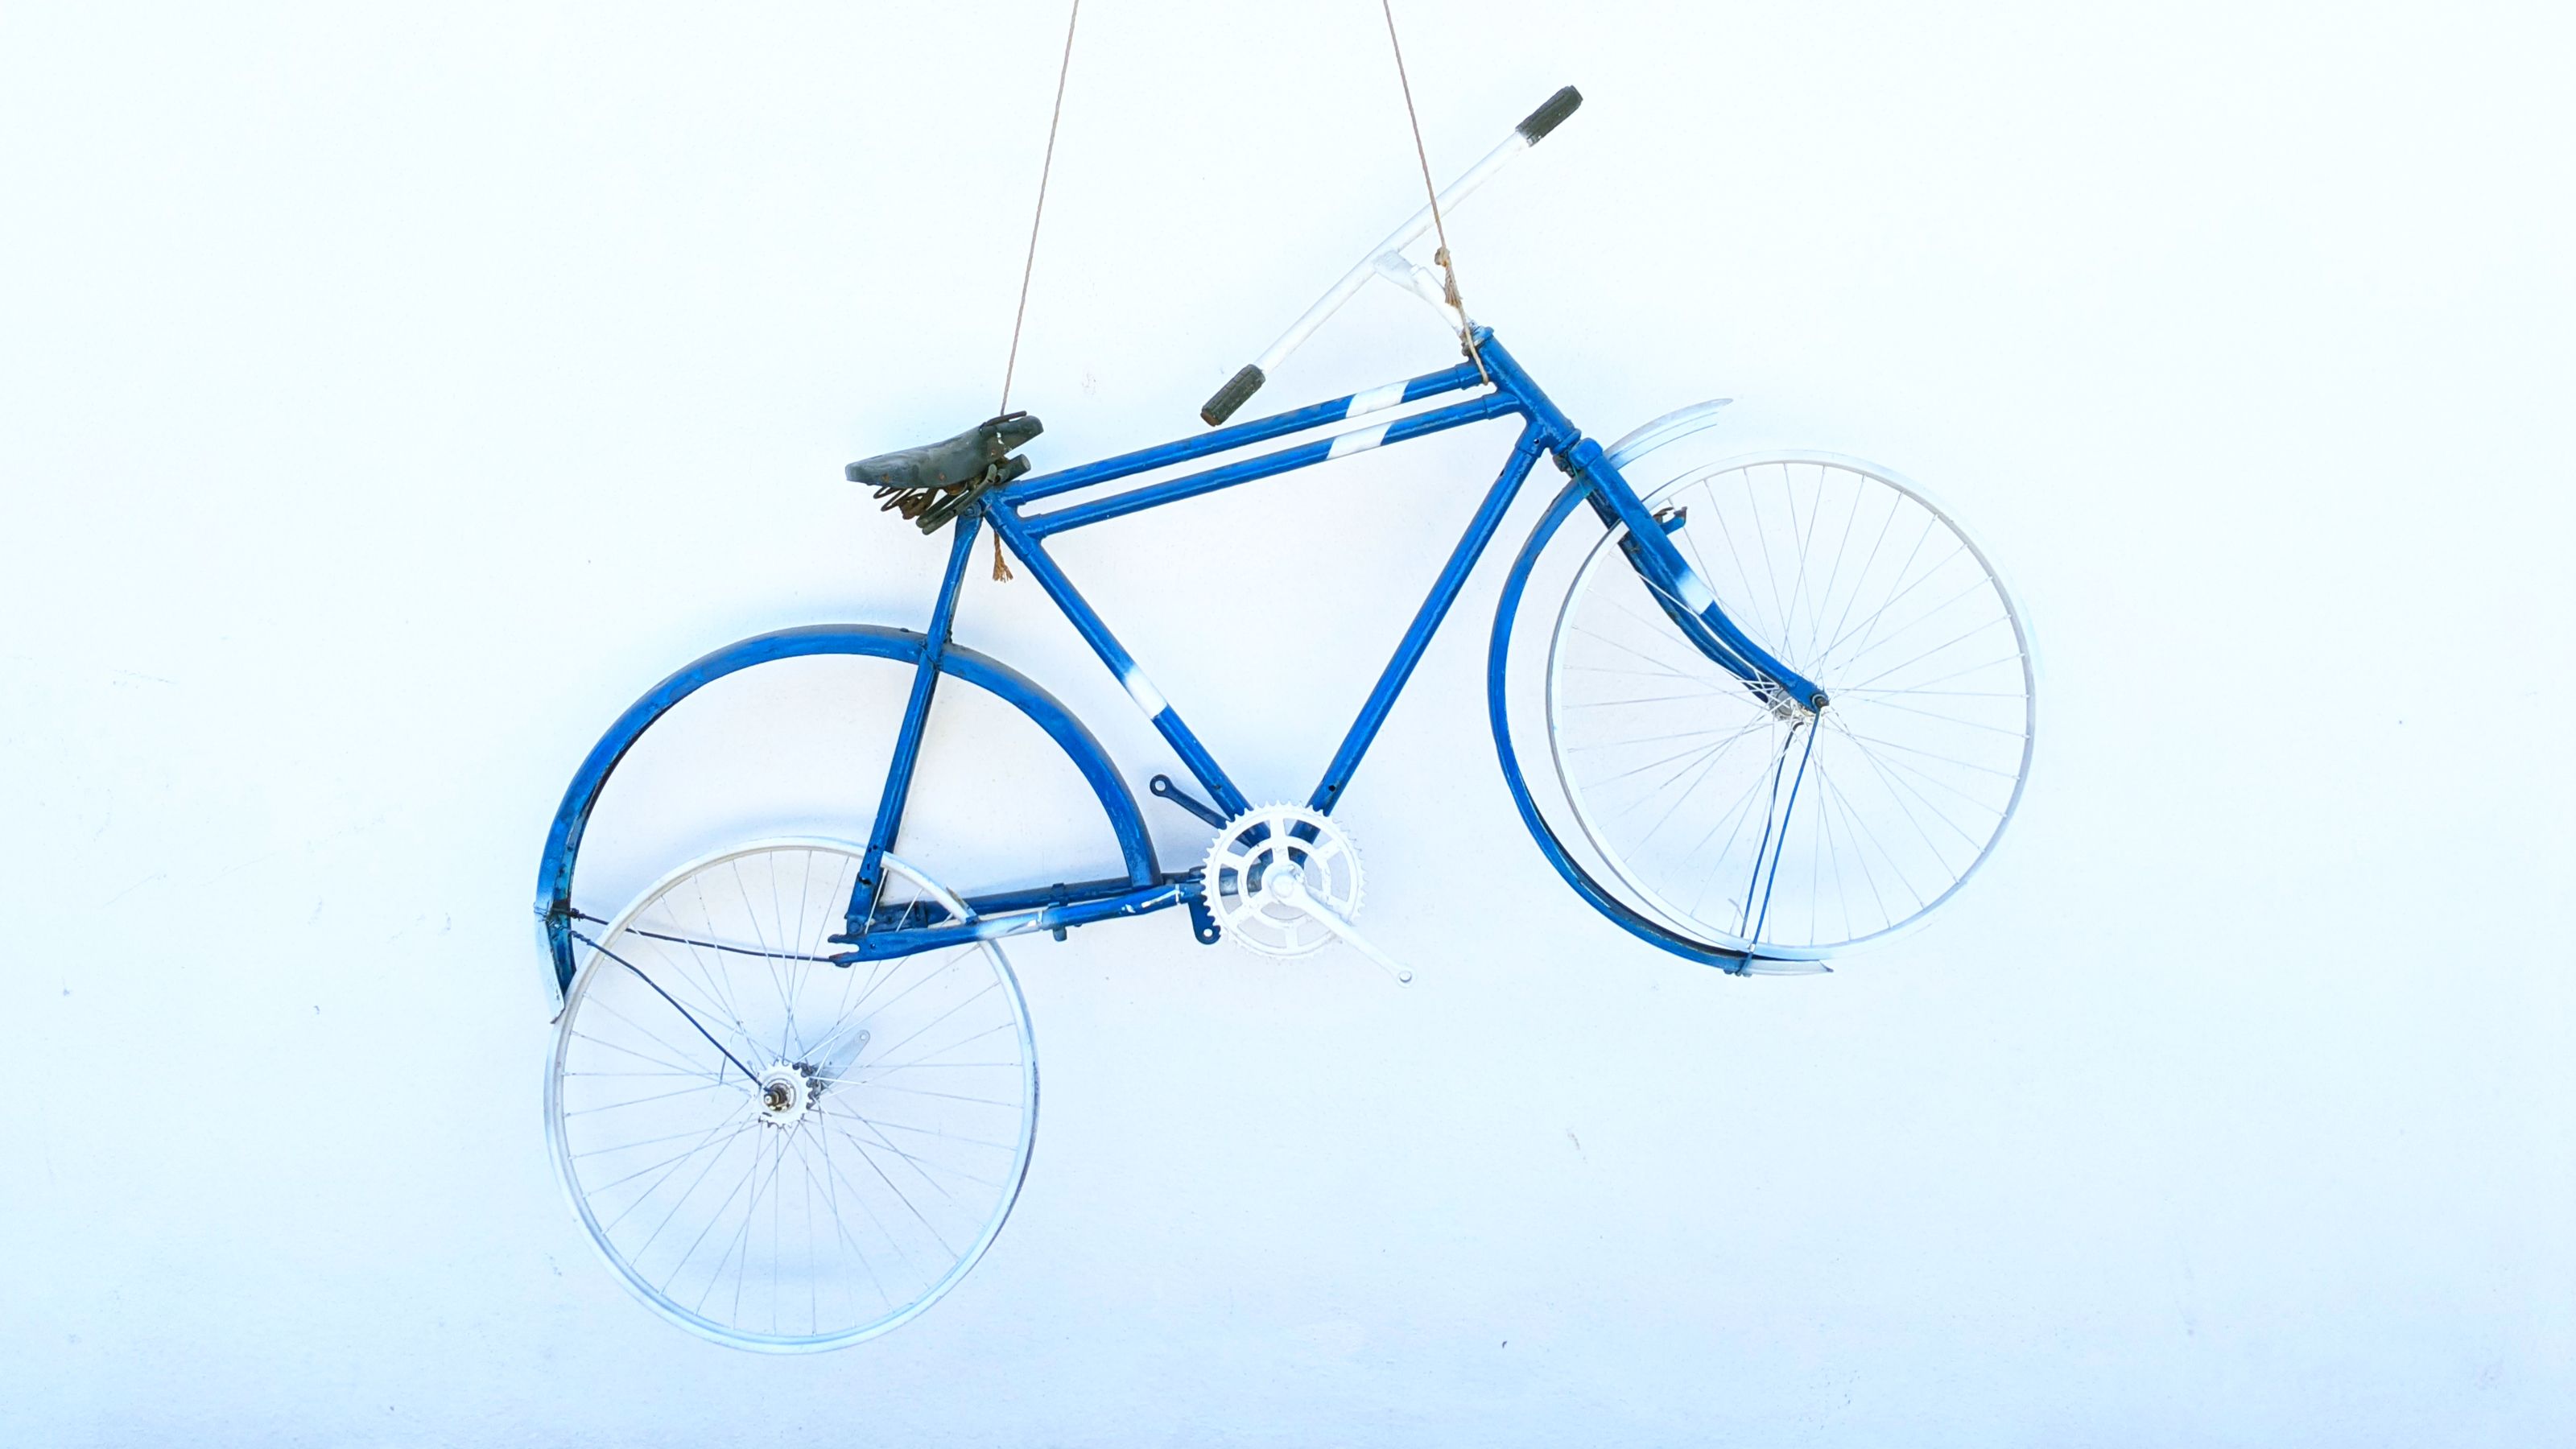 A blue vintage bicycle hanging on a white wall with its wheels parallel to the wall, creating a decorative display.